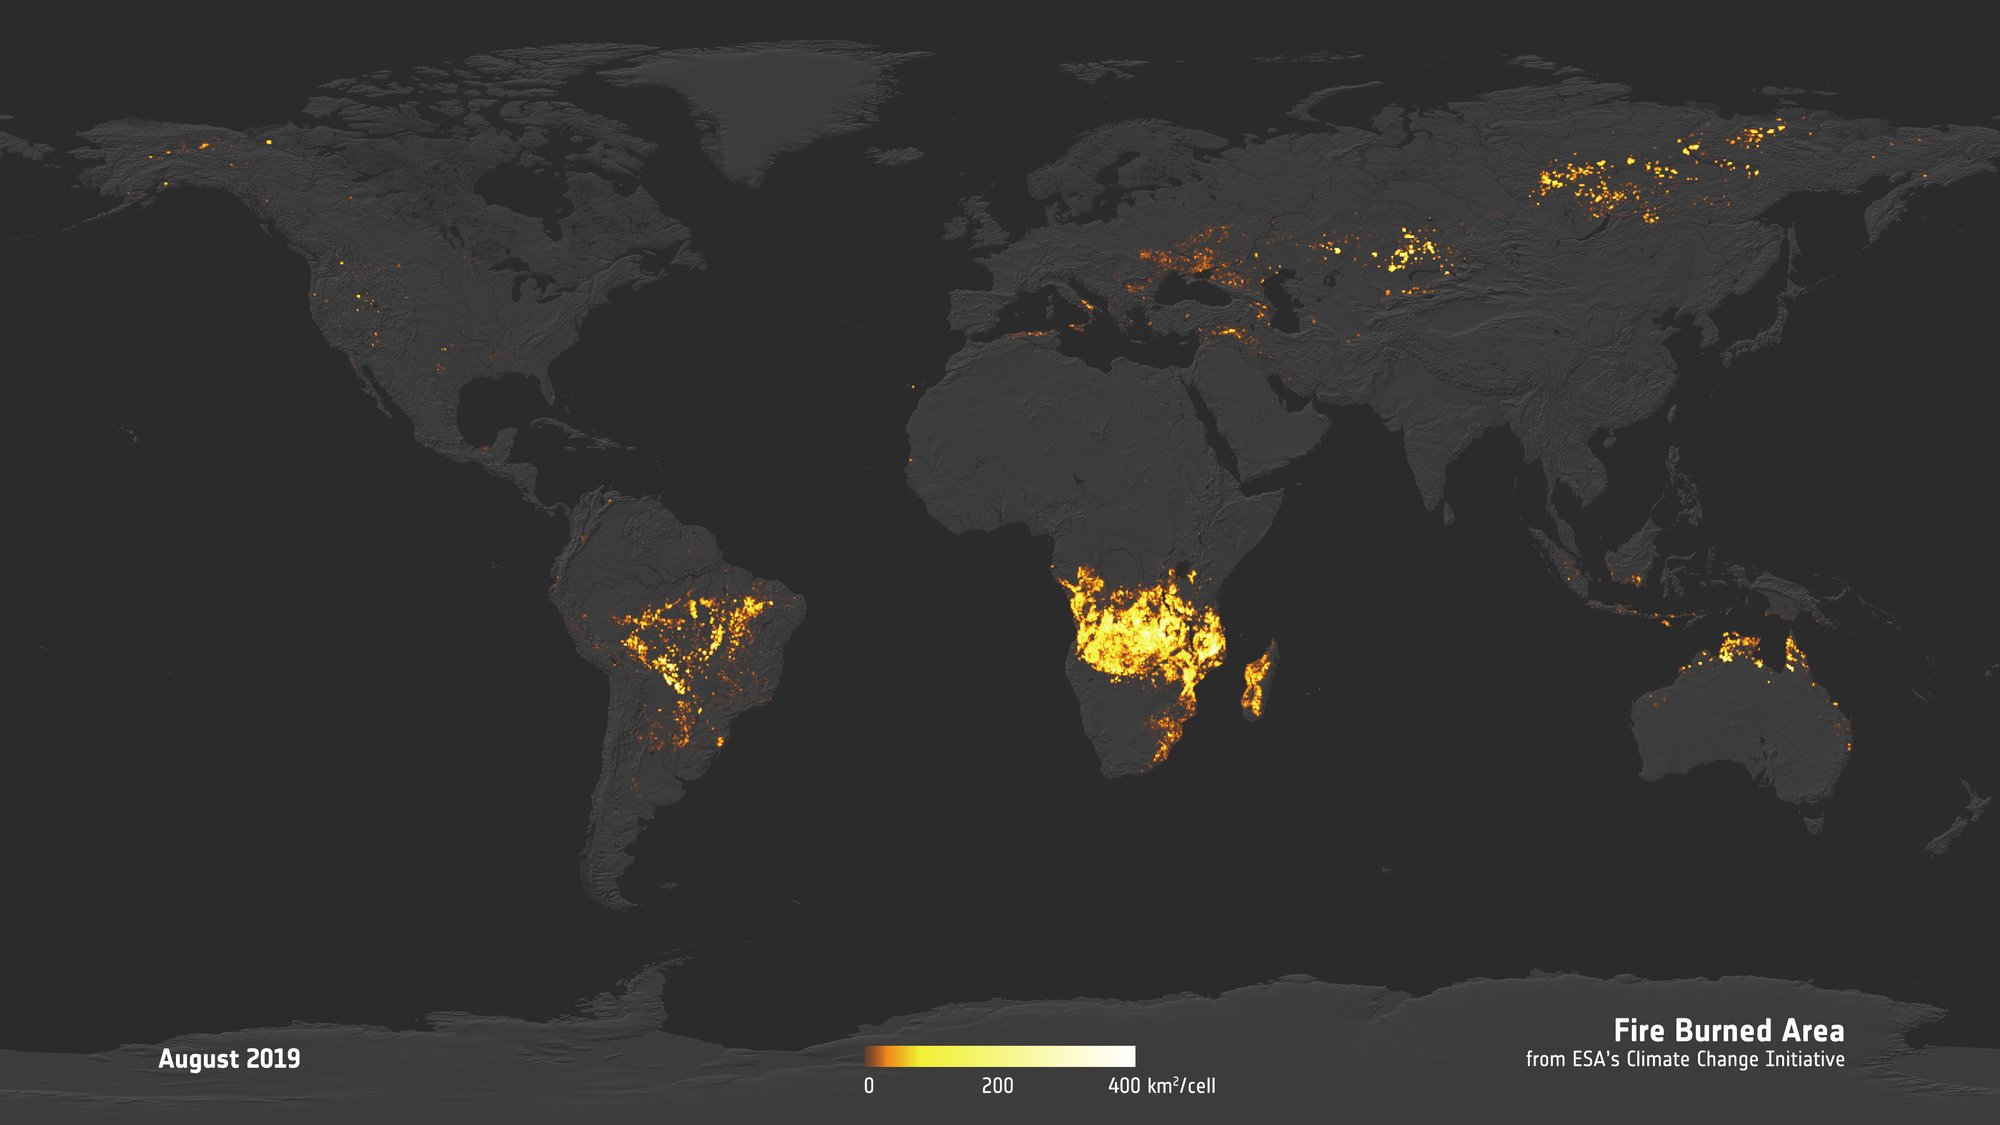 Globe burned area developed by ESA's Climate Change Initiative Fire project team